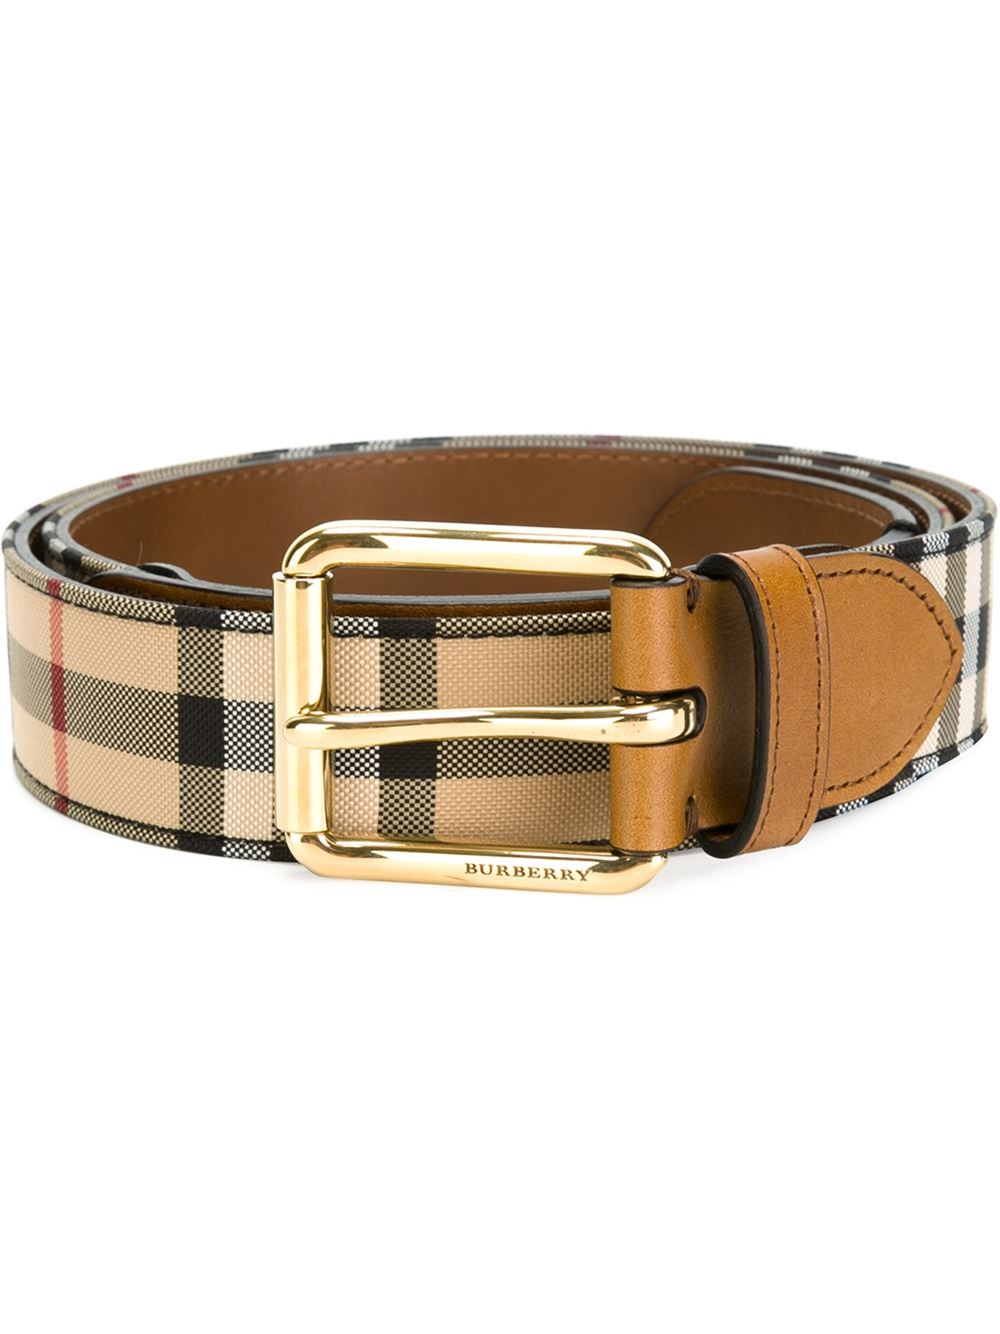 Burberry Leather Belt in Natural - Lyst